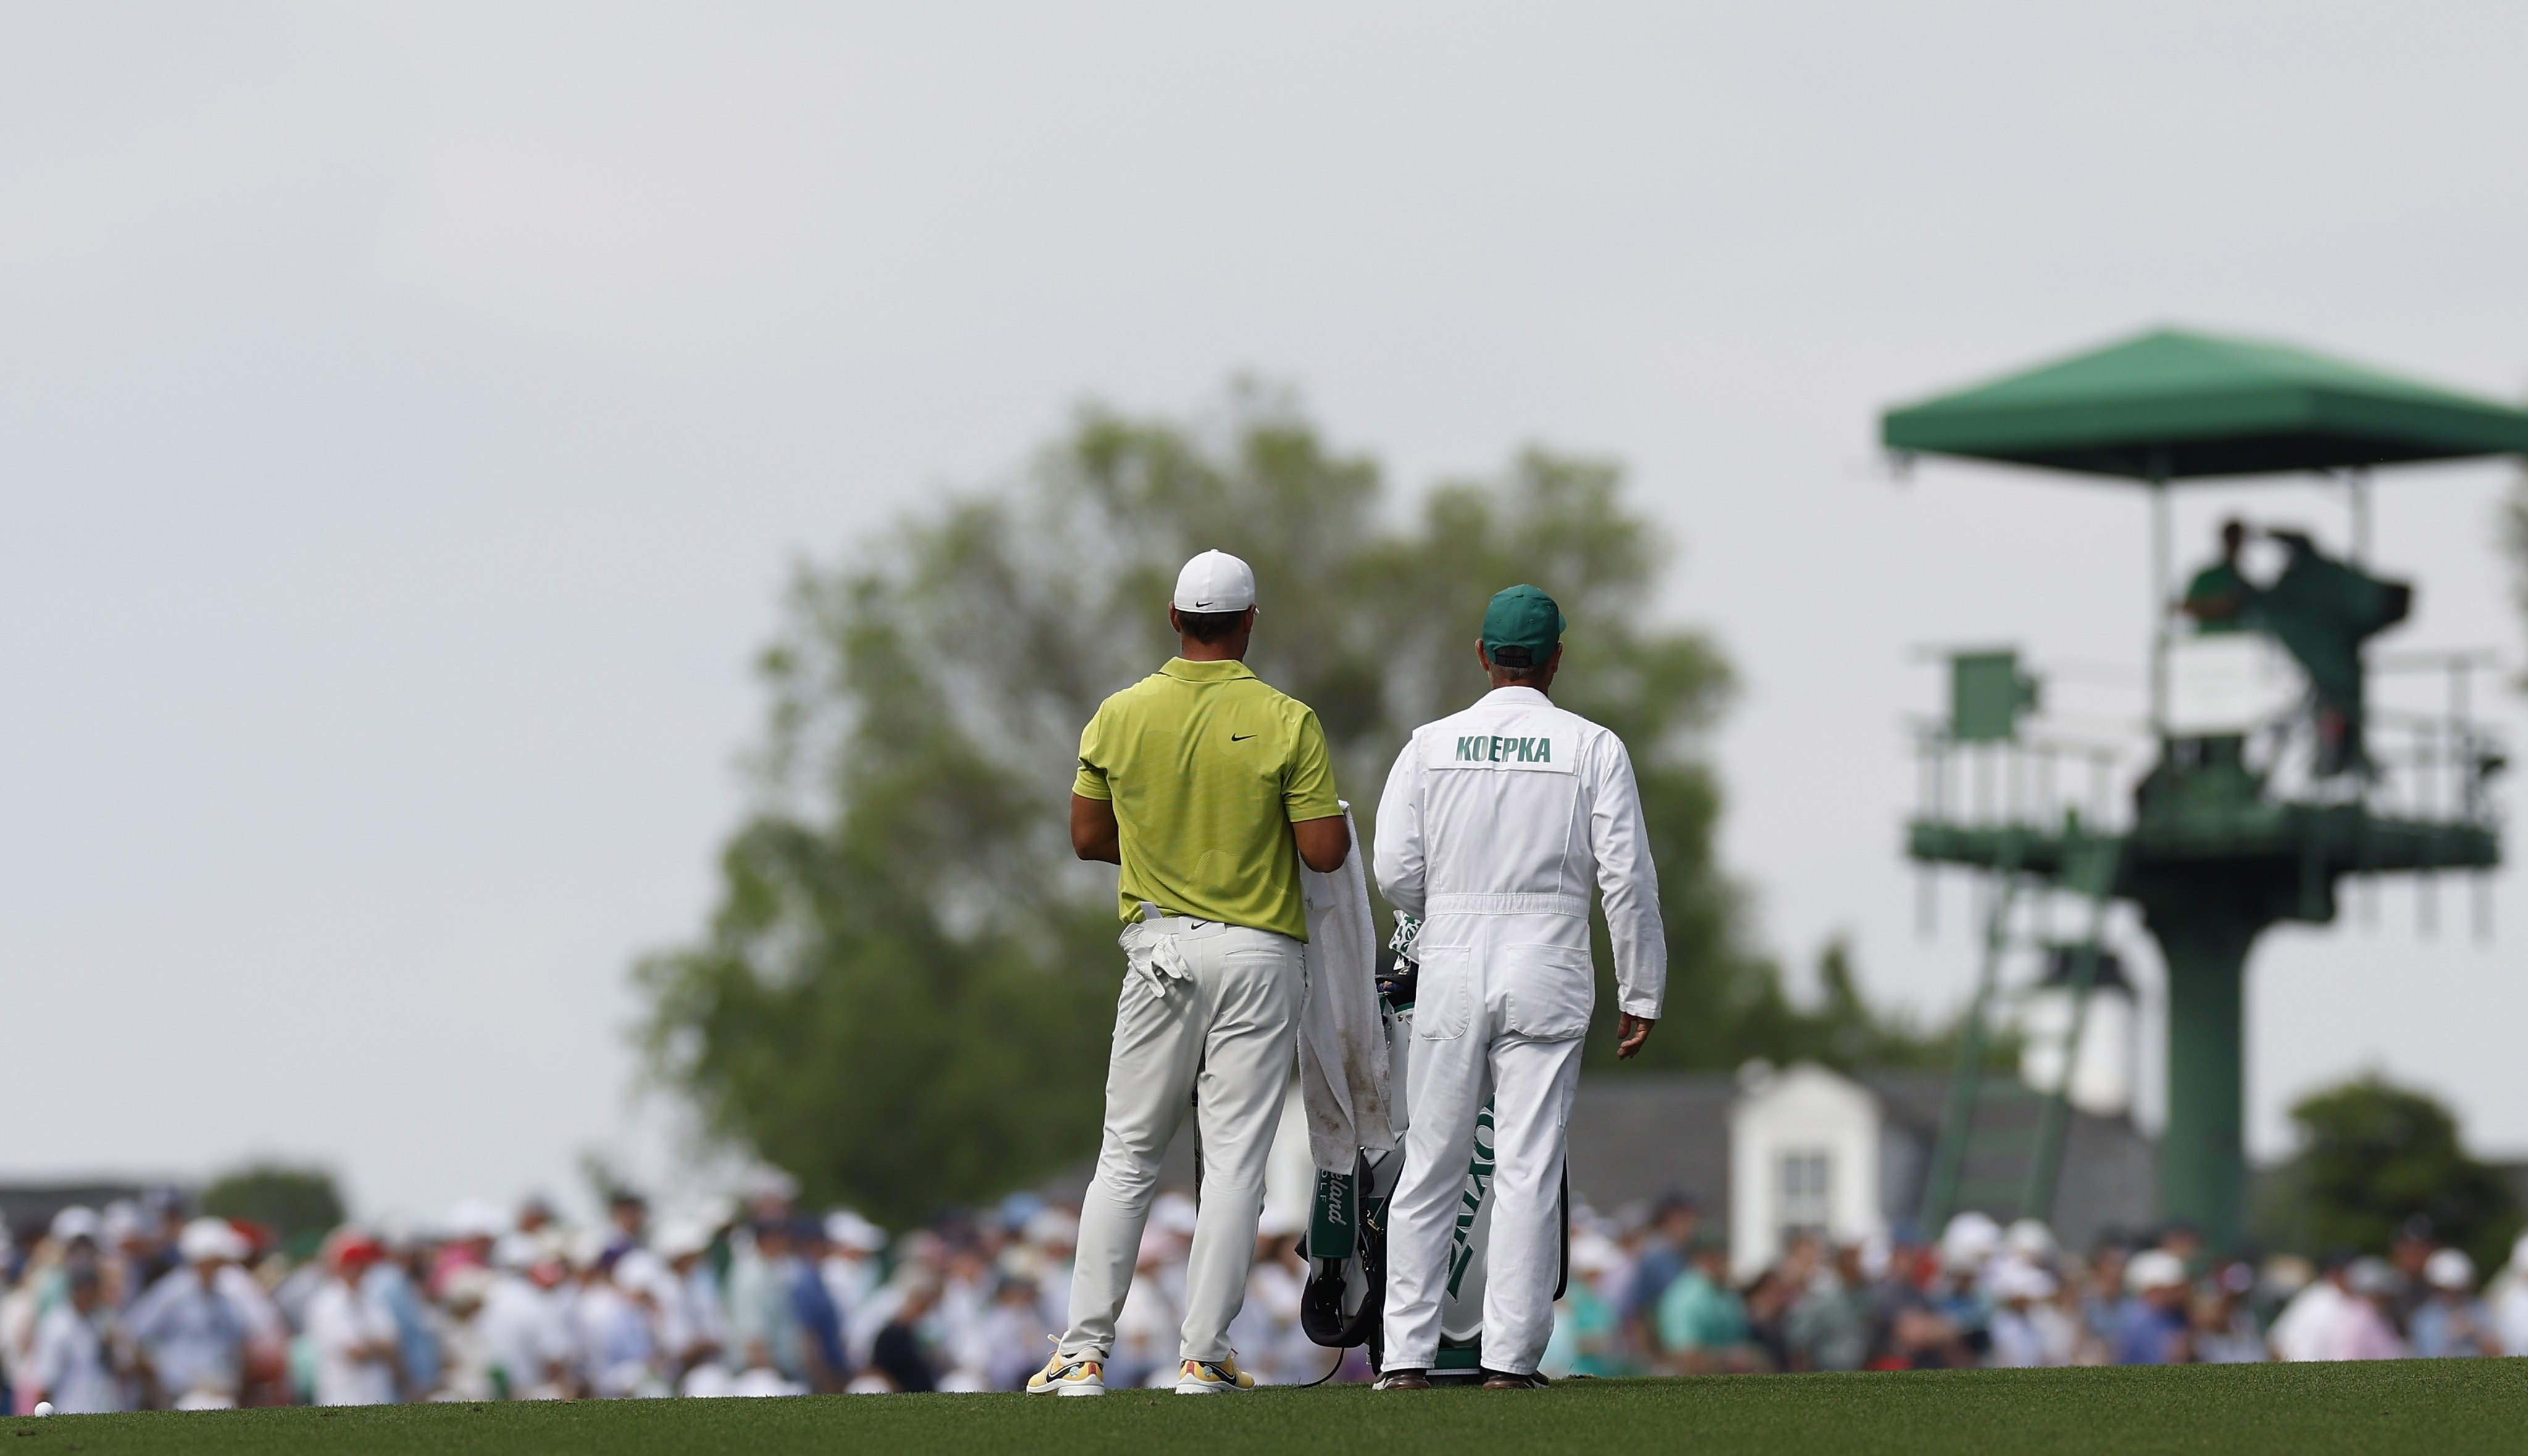 Brooks Koepka (left) and caddie Ricky Elliott stand on the 18th fairway during the first round of the Masters.  Photo: EPA-EFE